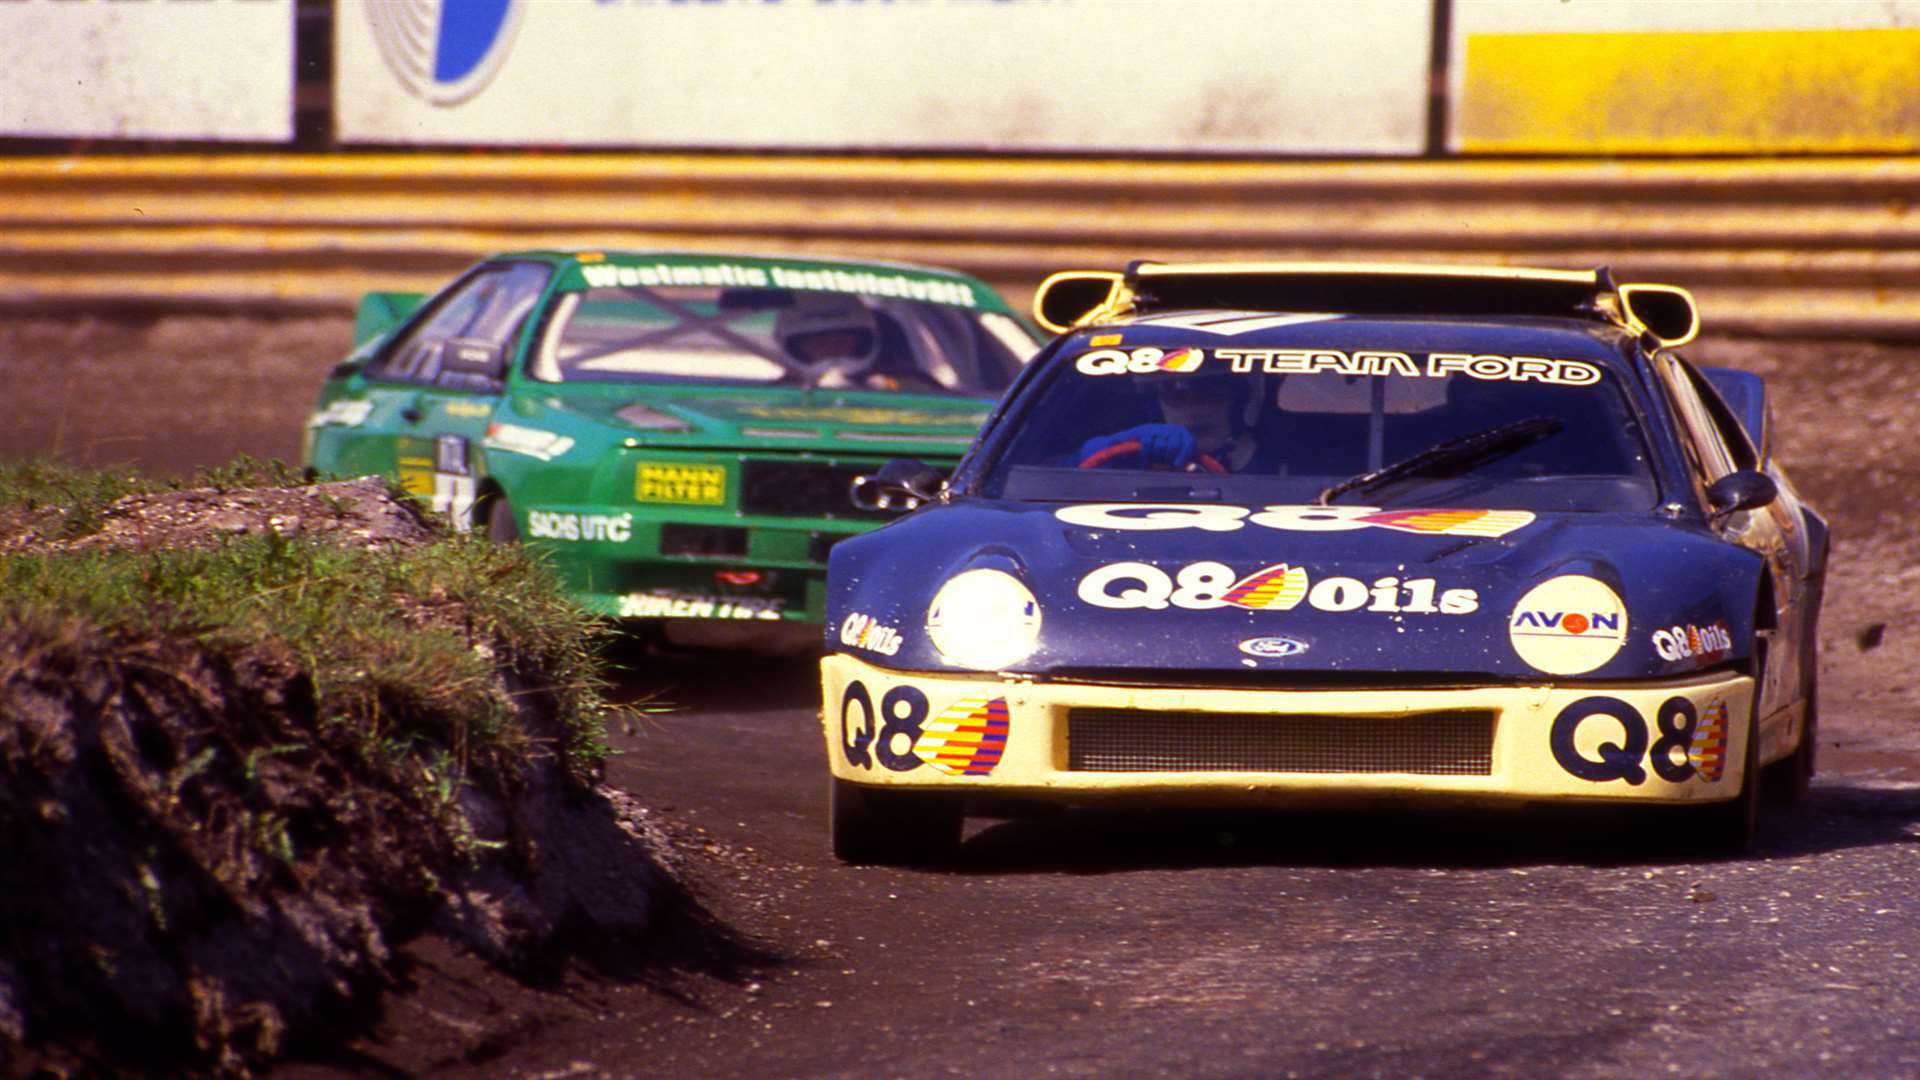 Pat Doran will race his iconic Ford RS200 in a celebration race in May. Picture - Lydden Hill Press Office